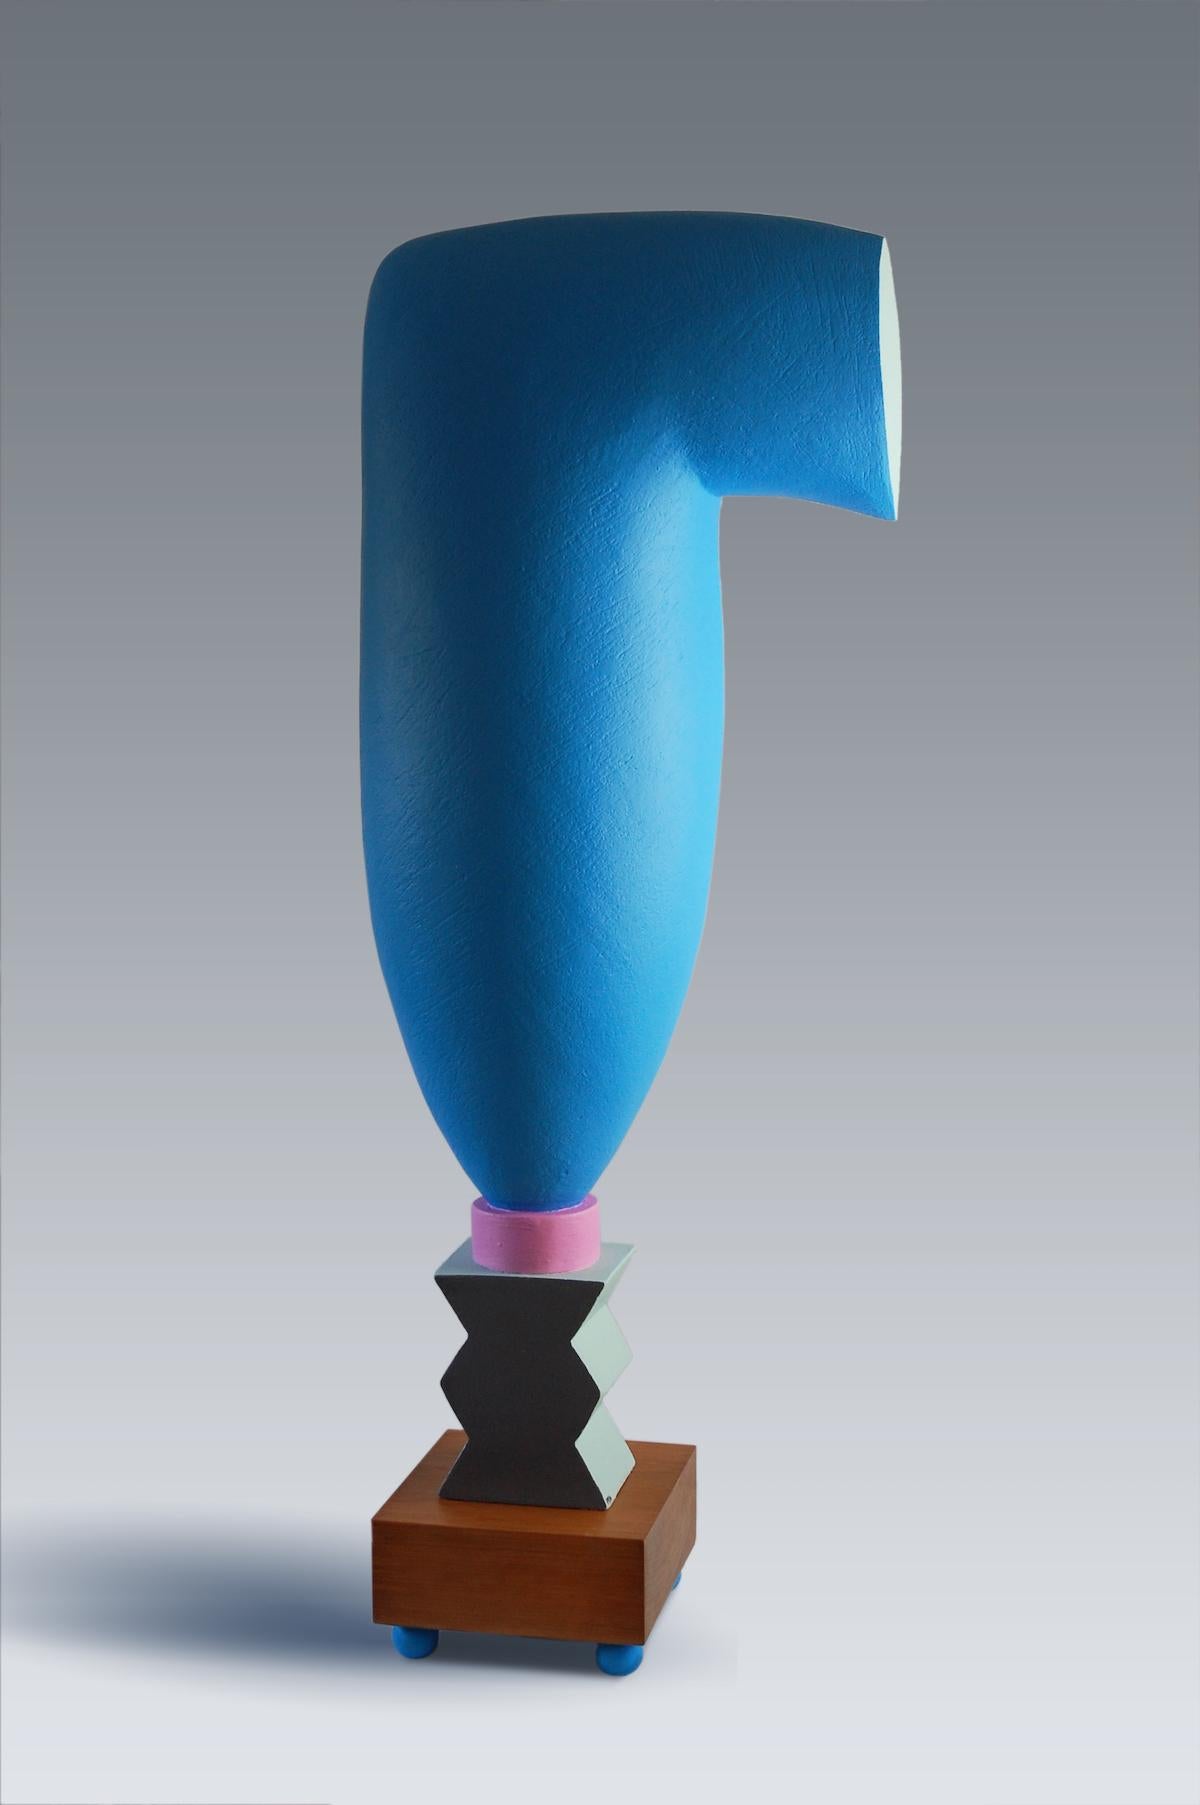 Serendipity (2) by Patricia Volk. Fired clay constructed, painted and mounted on wood, 95 cm × 35 cm × 18 cm.
Patricia Volk is a member of the Royal Society of Sculptors (FRSS) and an Academician of the Royal West of England Academy (RWA). Her work